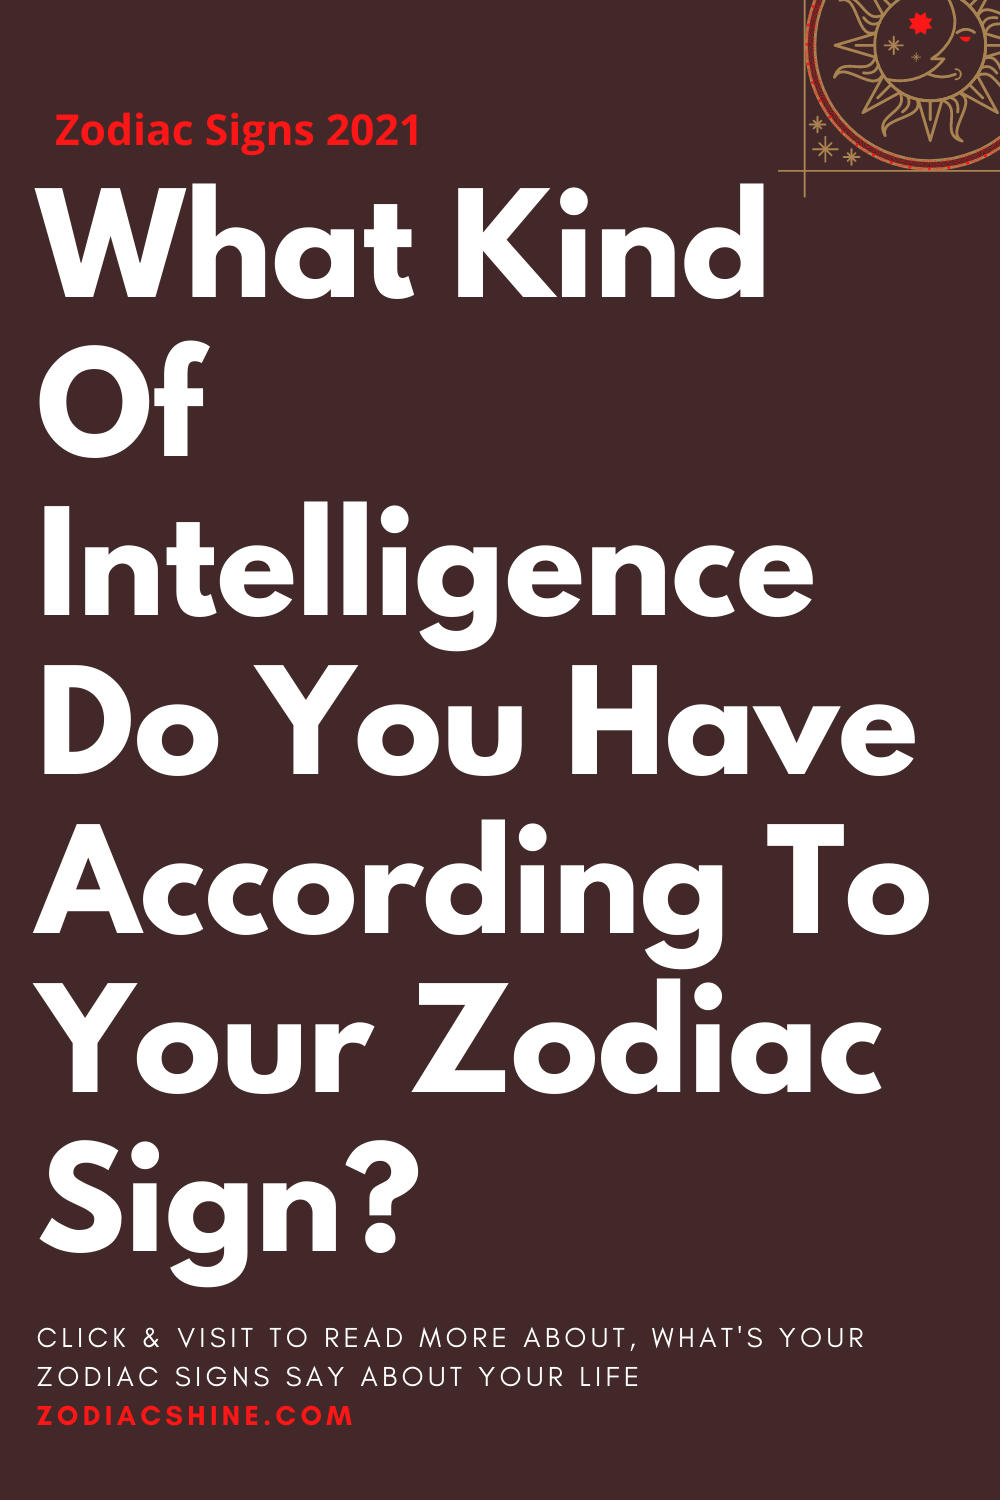 What Kind Of Intelligence Do You Have According To Your Zodiac Sign?